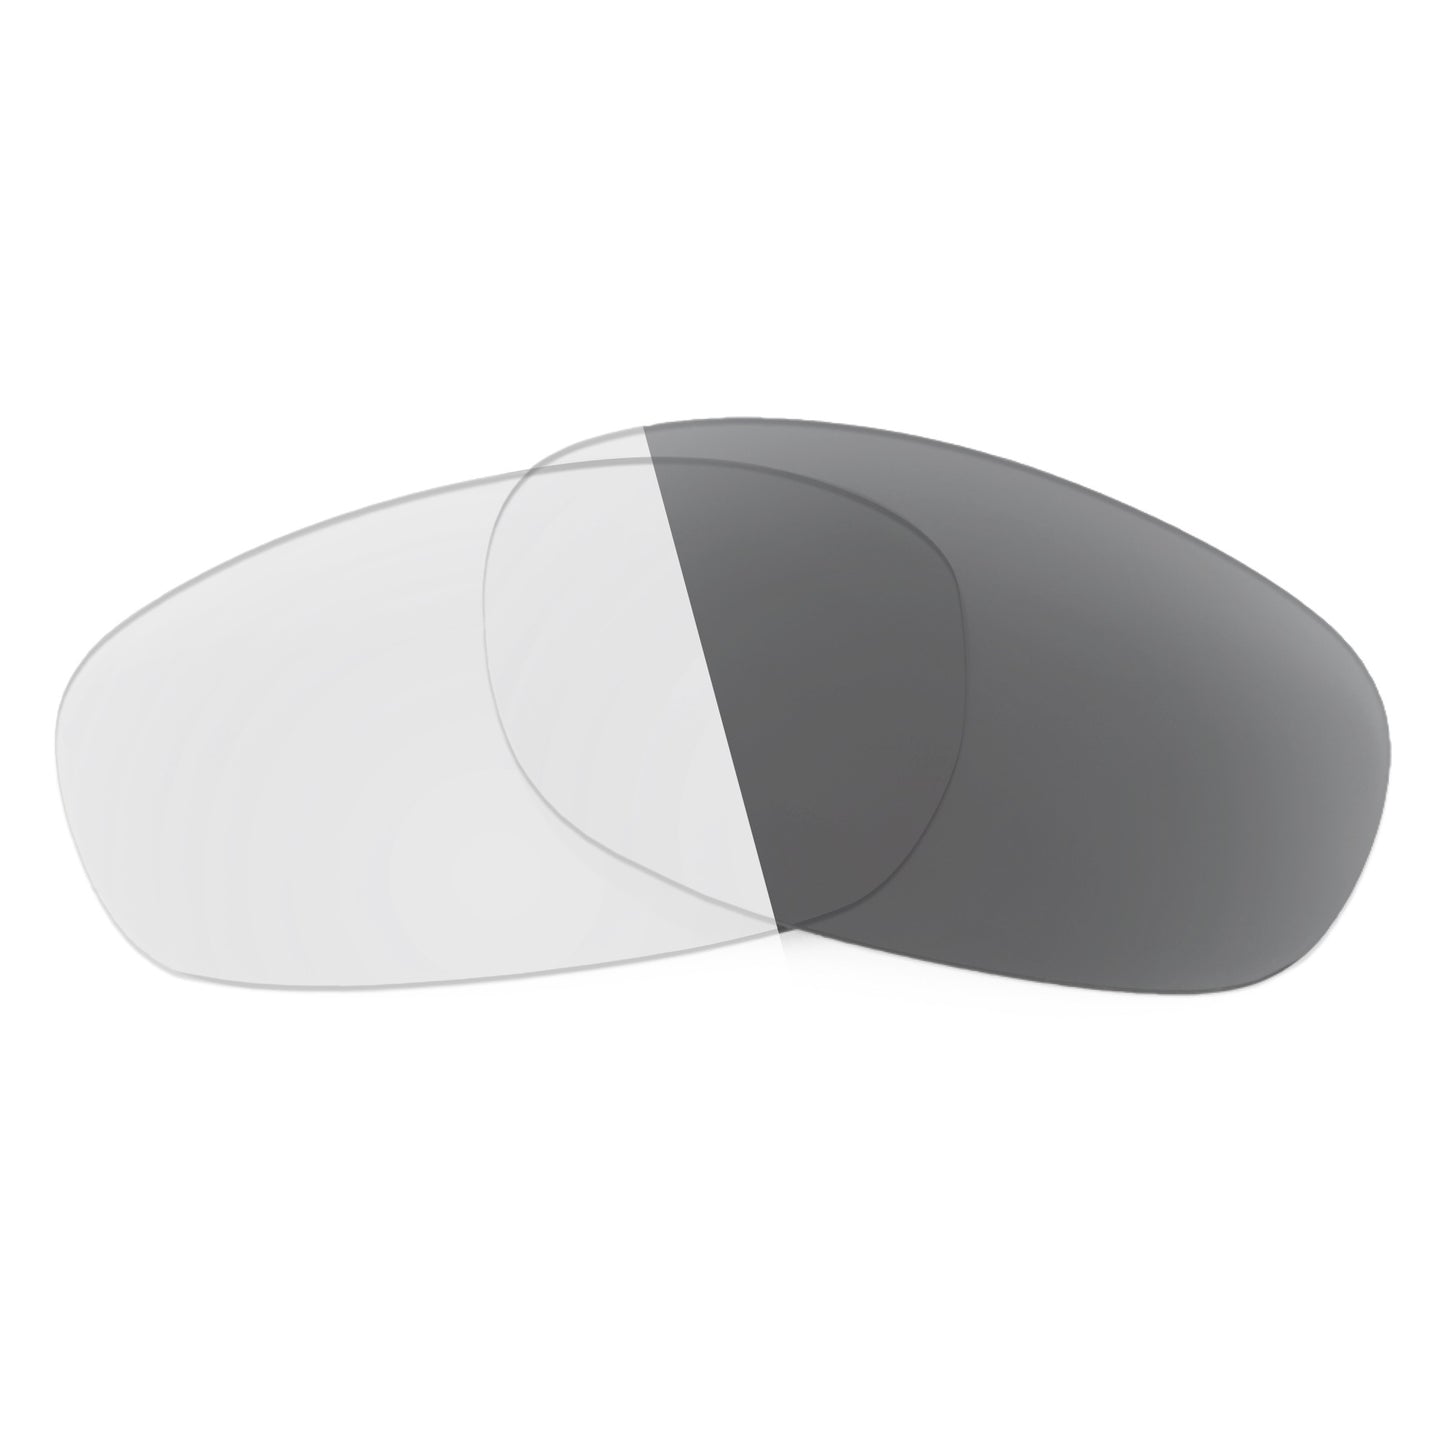 Revant replacement lenses for Ray-Ban RB8316 62mm Non-Polarized Adapt Gray Photochromic